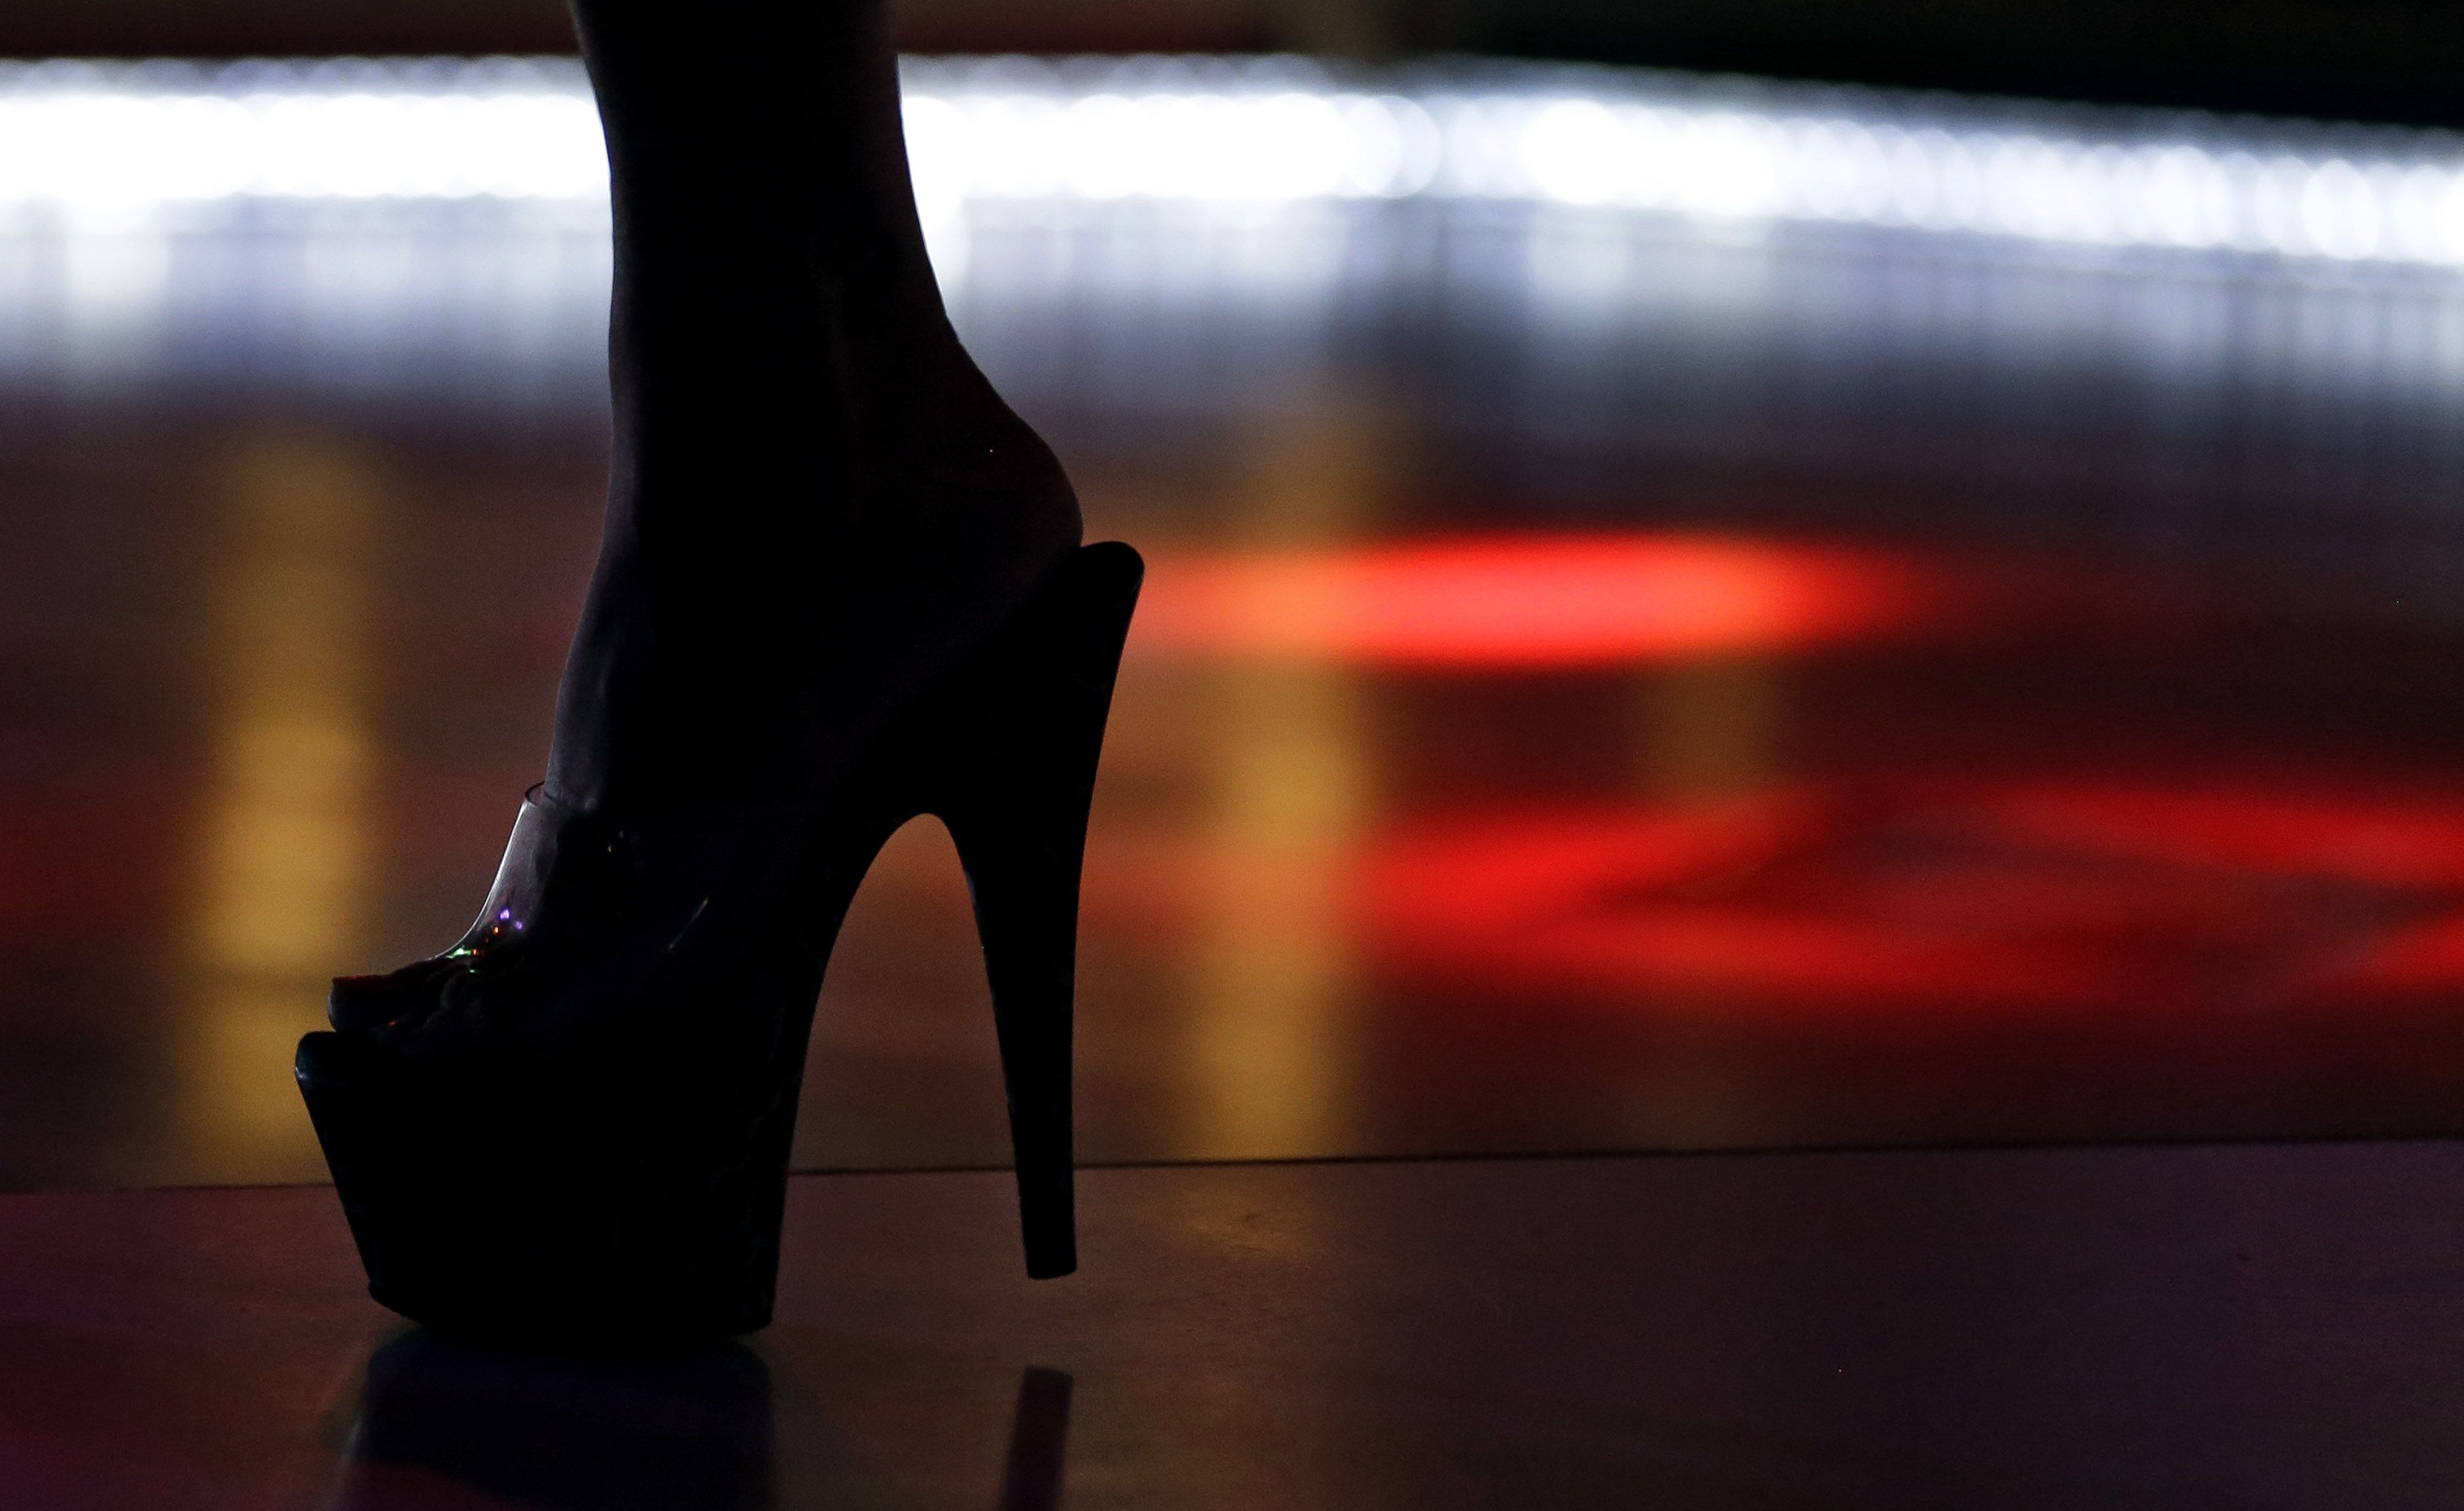 Take it off the top: Metro Detroit strip club owner accused of